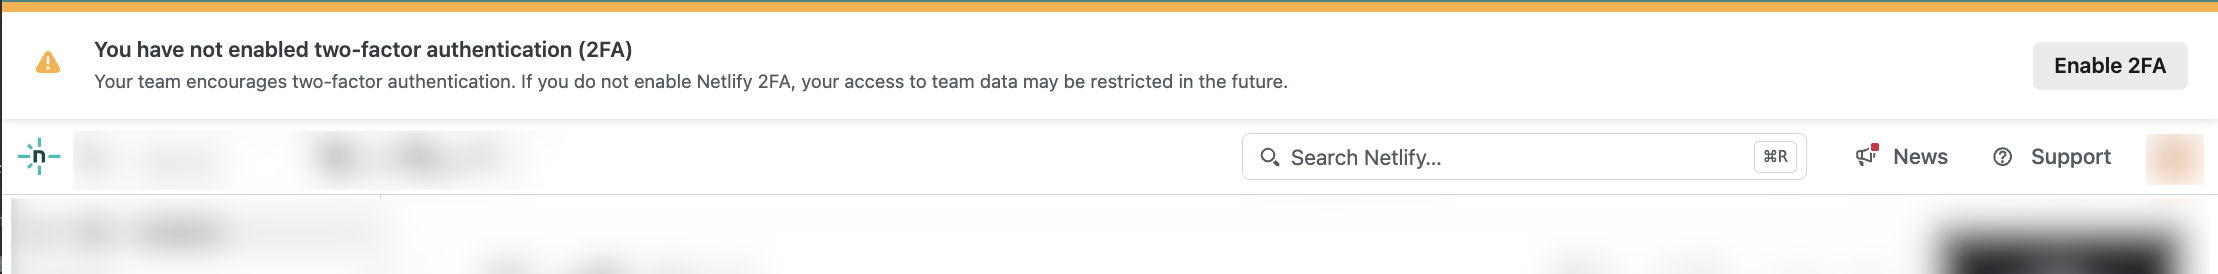 Warning banner in Netlify UI that informs the user they have not enabled two-factor authentication (2FA) and that their team encourages 2FA with the warning that they may lose access to team data in the future if they do not enable 2FA